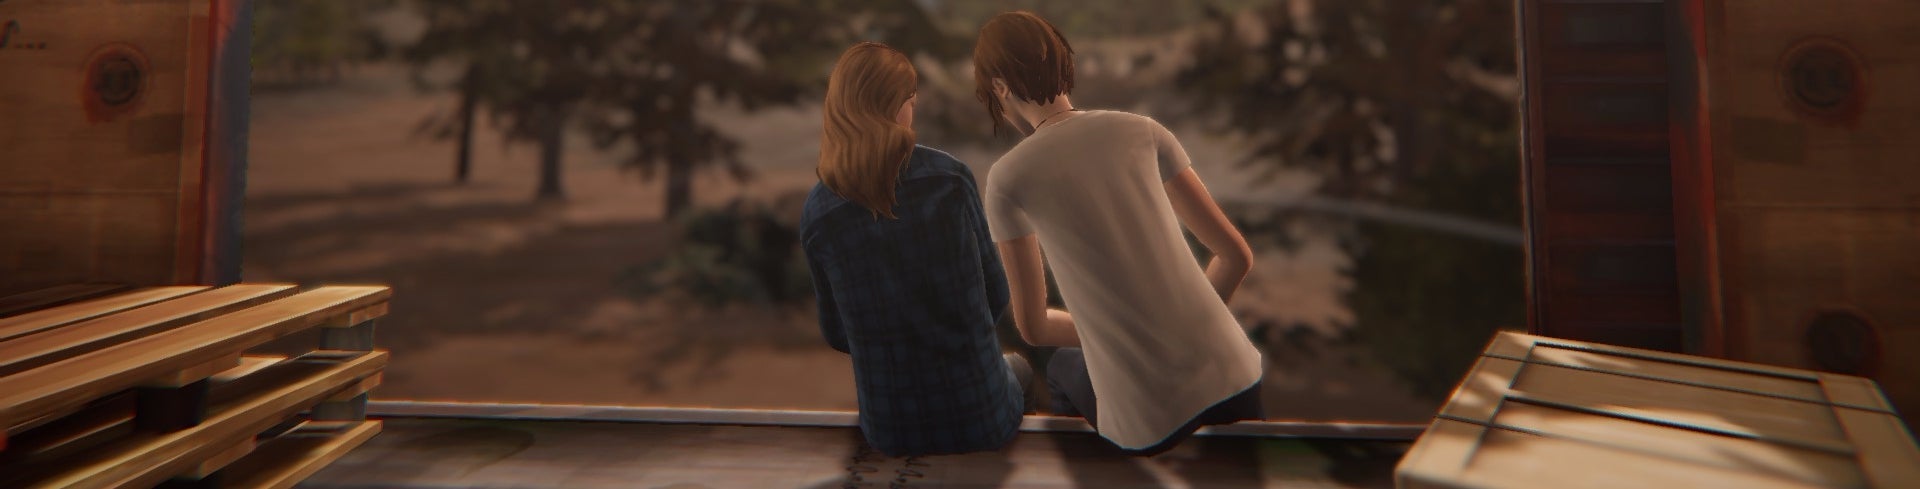 Image for Life is Strange and the pleasures of being someone else